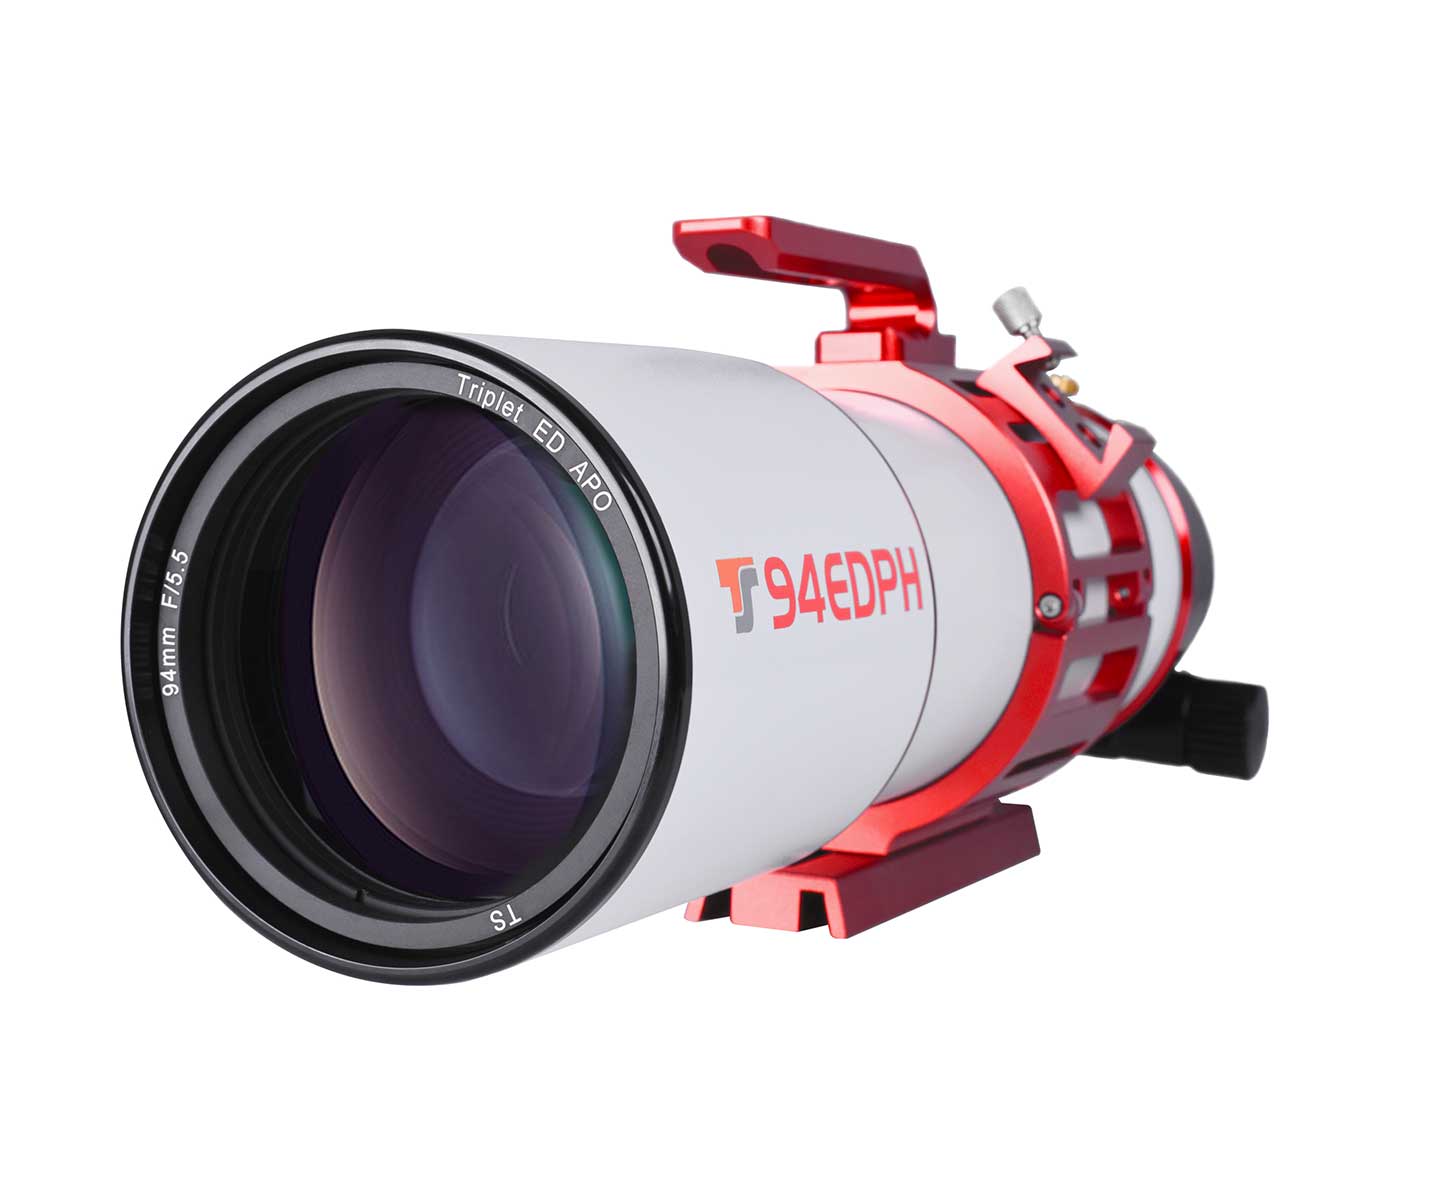  The fast flatfield apochromat with 94 mm aperture and 414 mm focal length was developed by Teleskop-Service for astrophotography. [EN] 